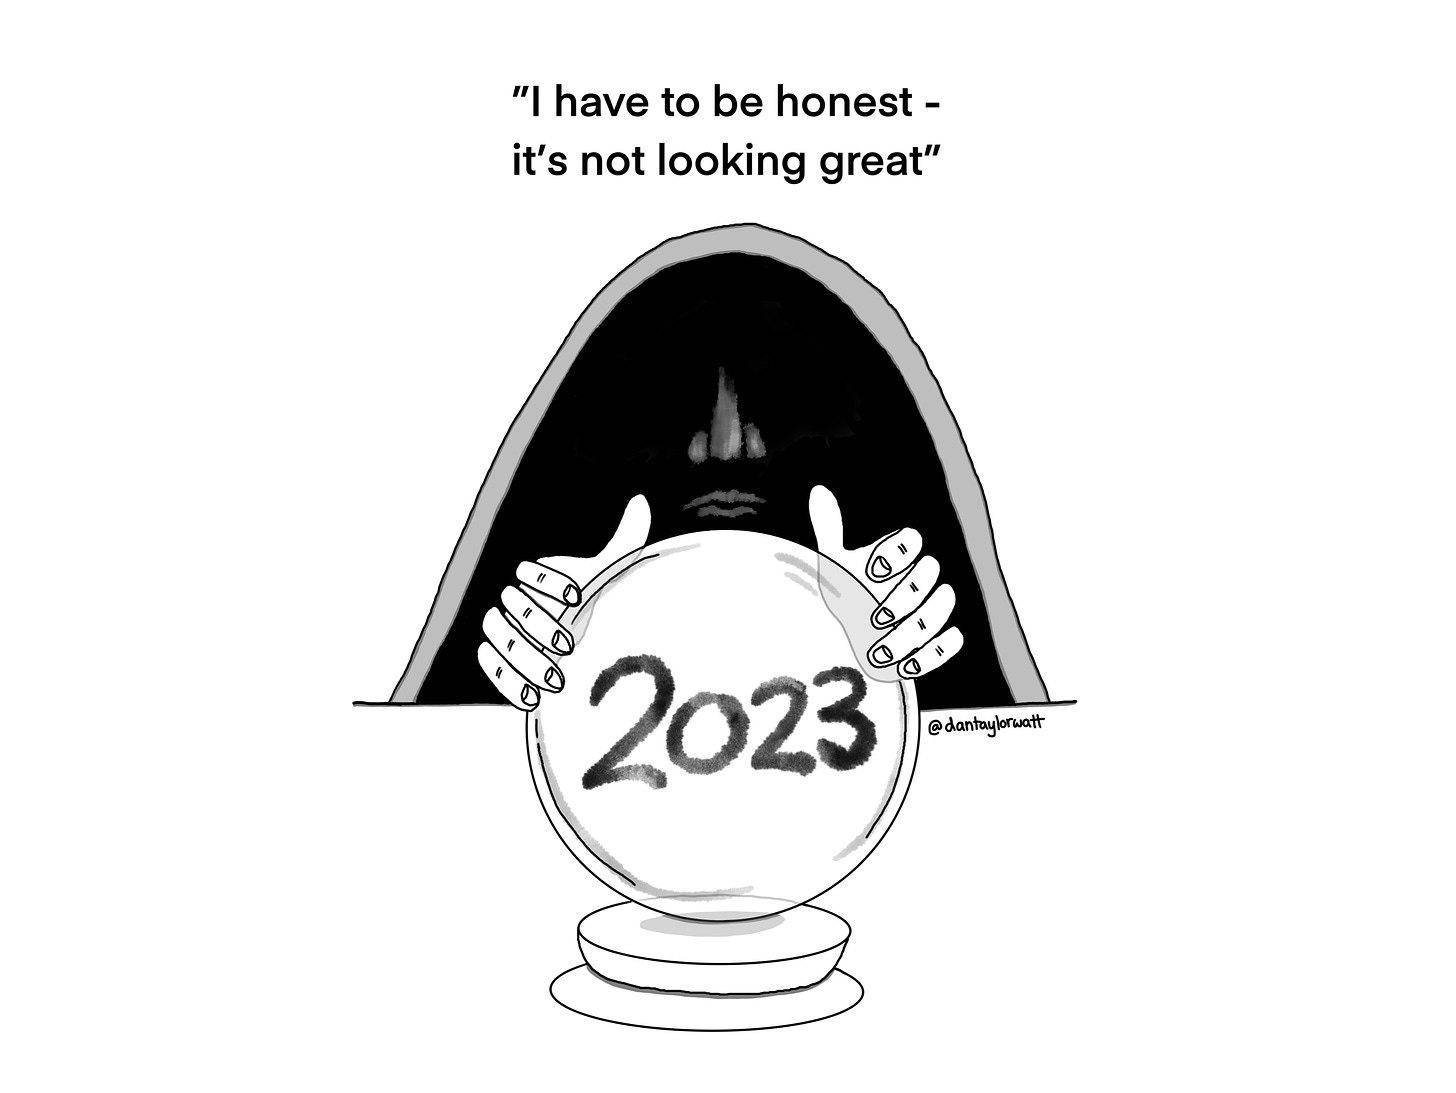 Cartoon of fortune teller looking into a crystal ball with ‘2023’ inside. Text reads: “I have to be honest - it’s not looking great”